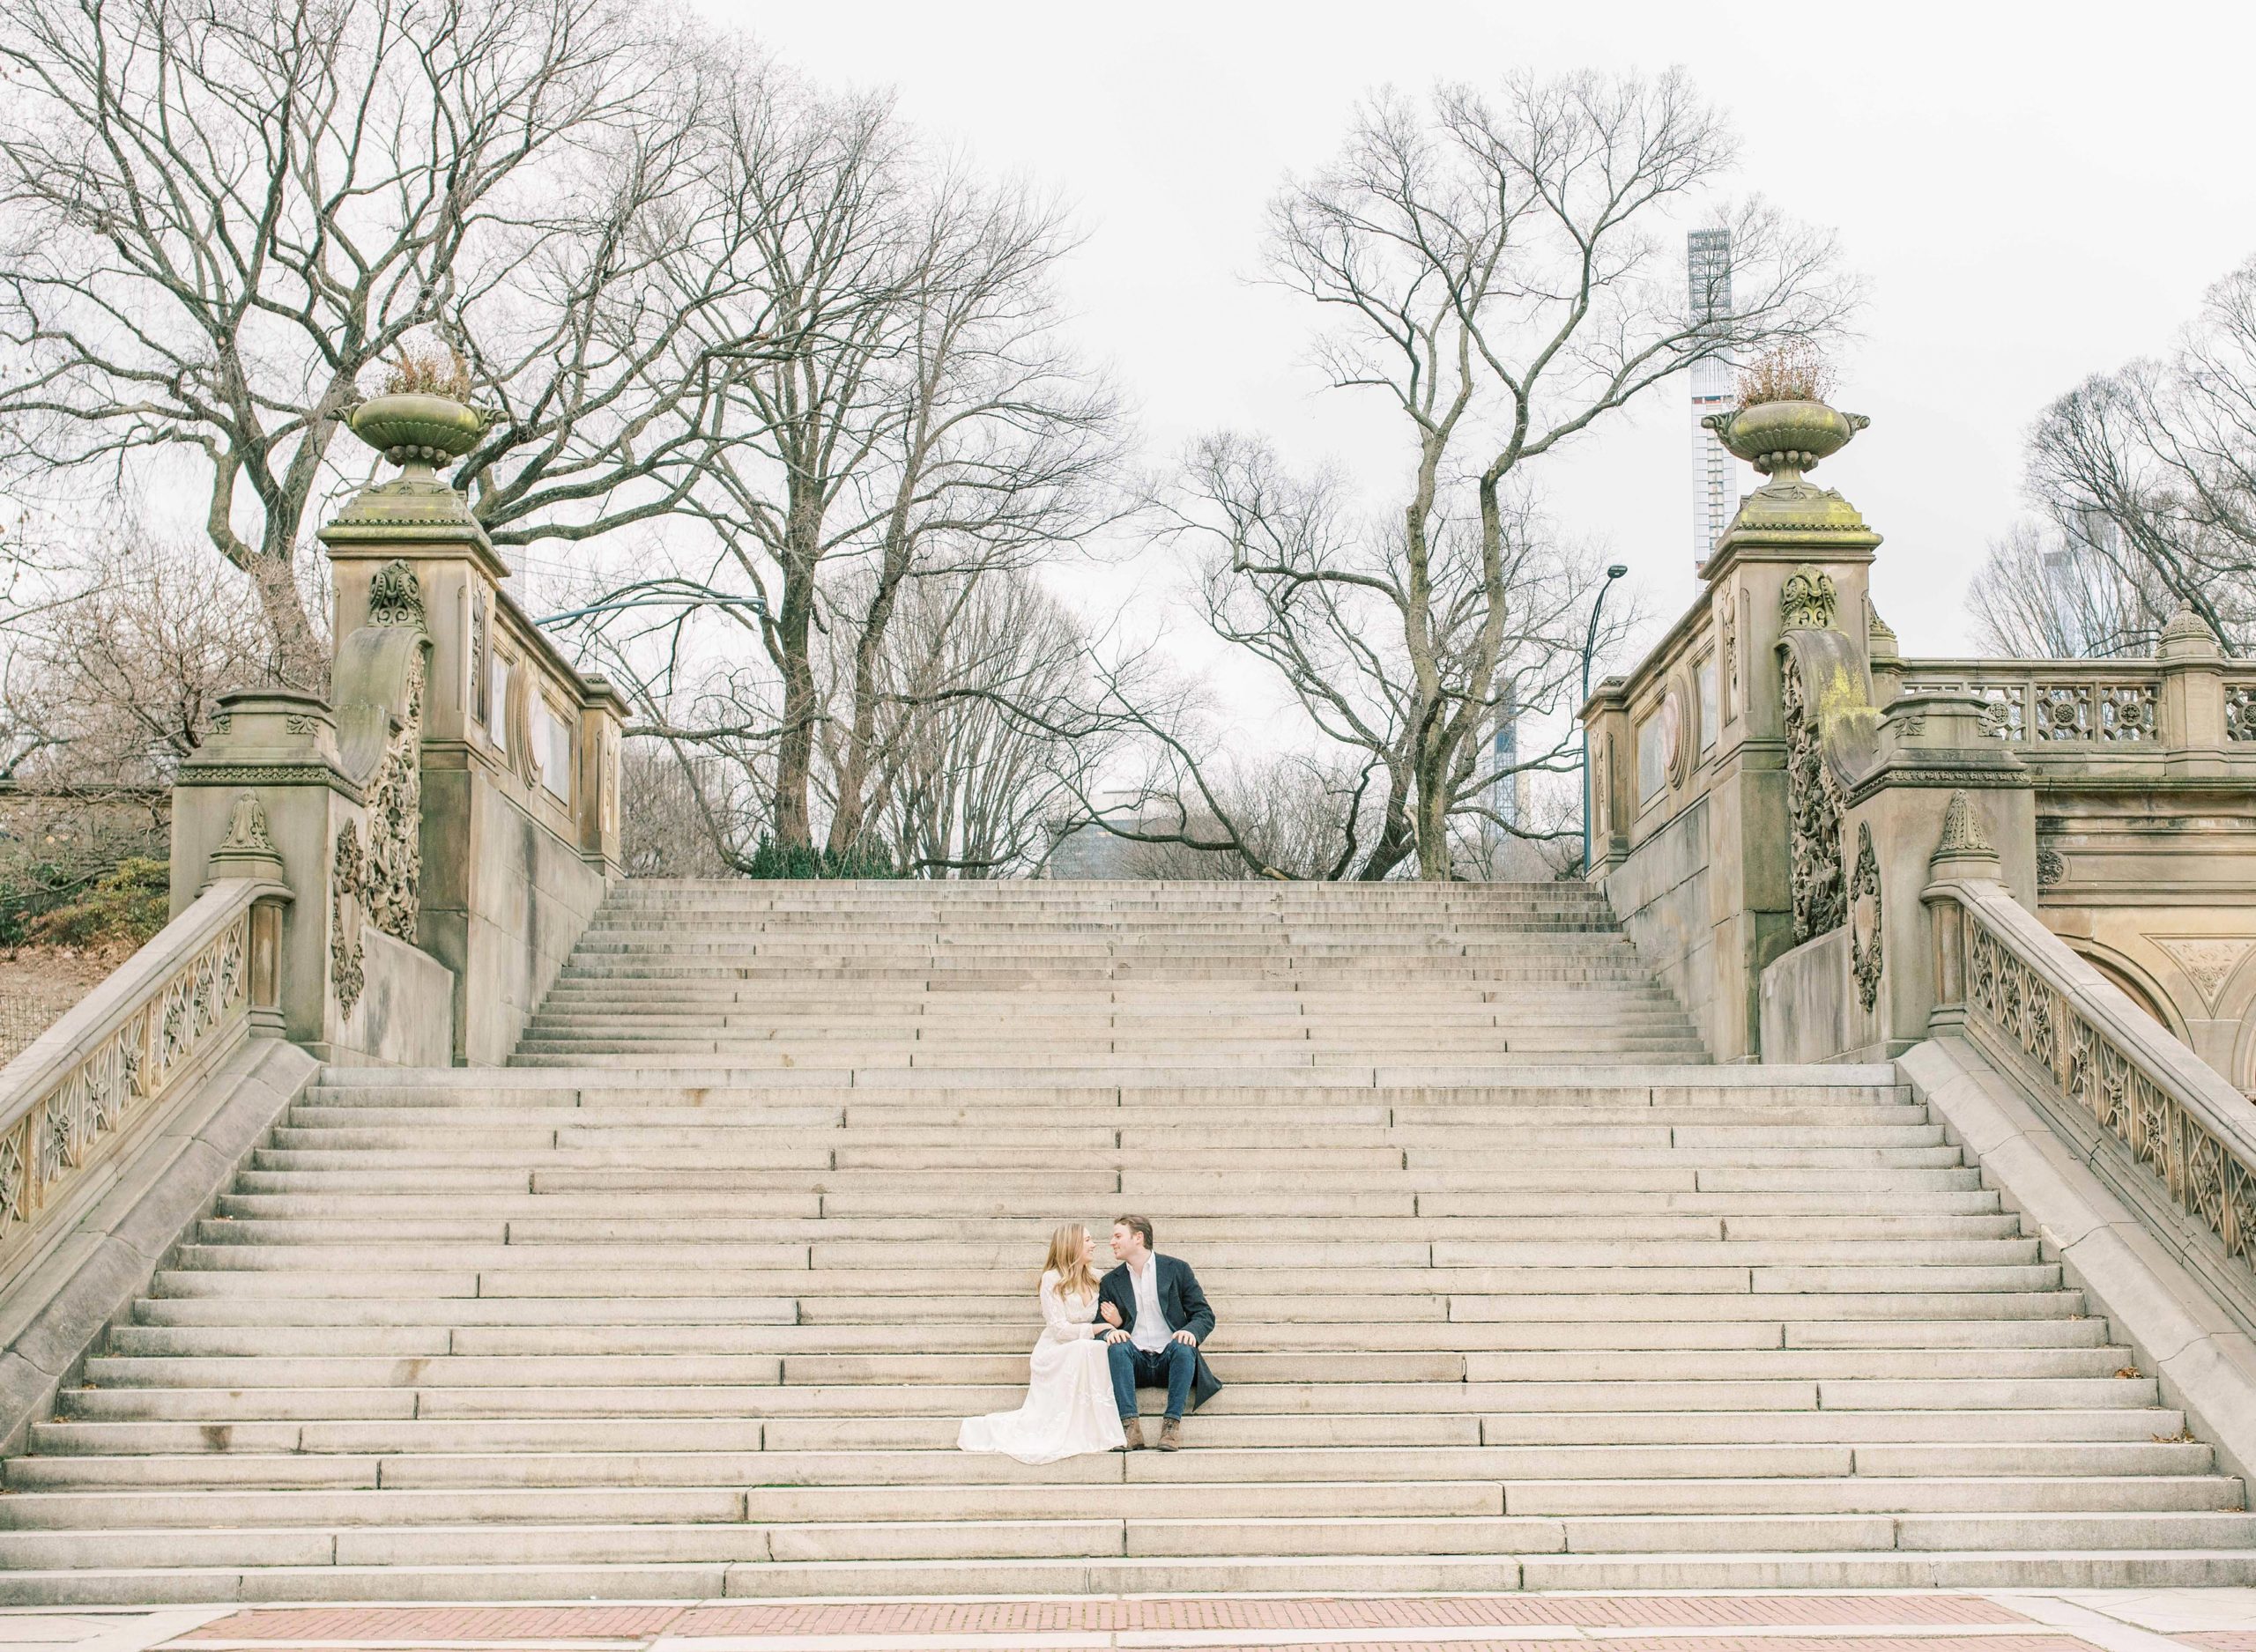 A beautiful Central Park Engagement Session in New York City at Bethesda Terrace and the iconic Bow Bridge.